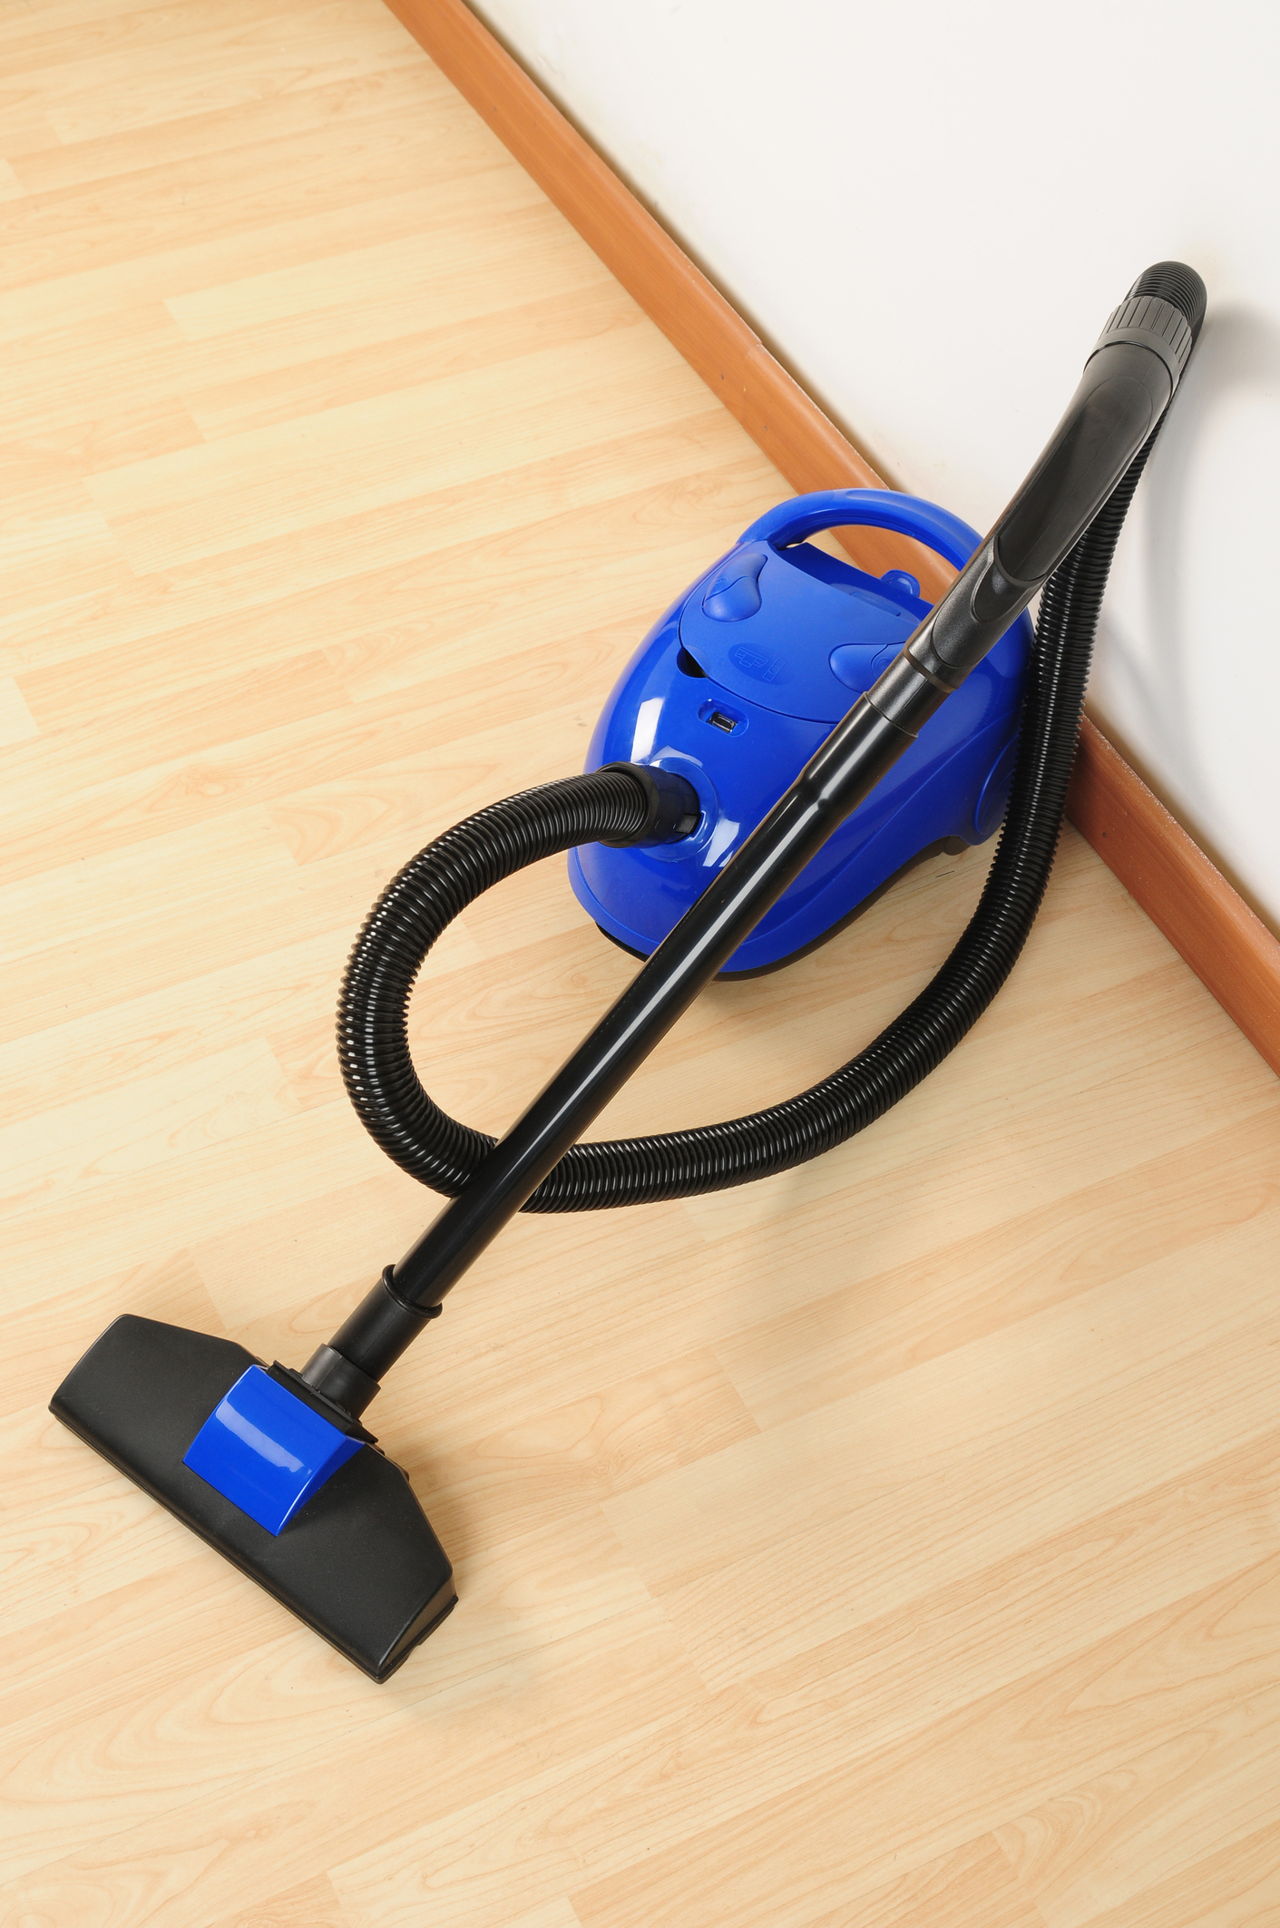 Clean Laminate Floors Without Streaking, How To Clean Laminate Floors Without Streaks